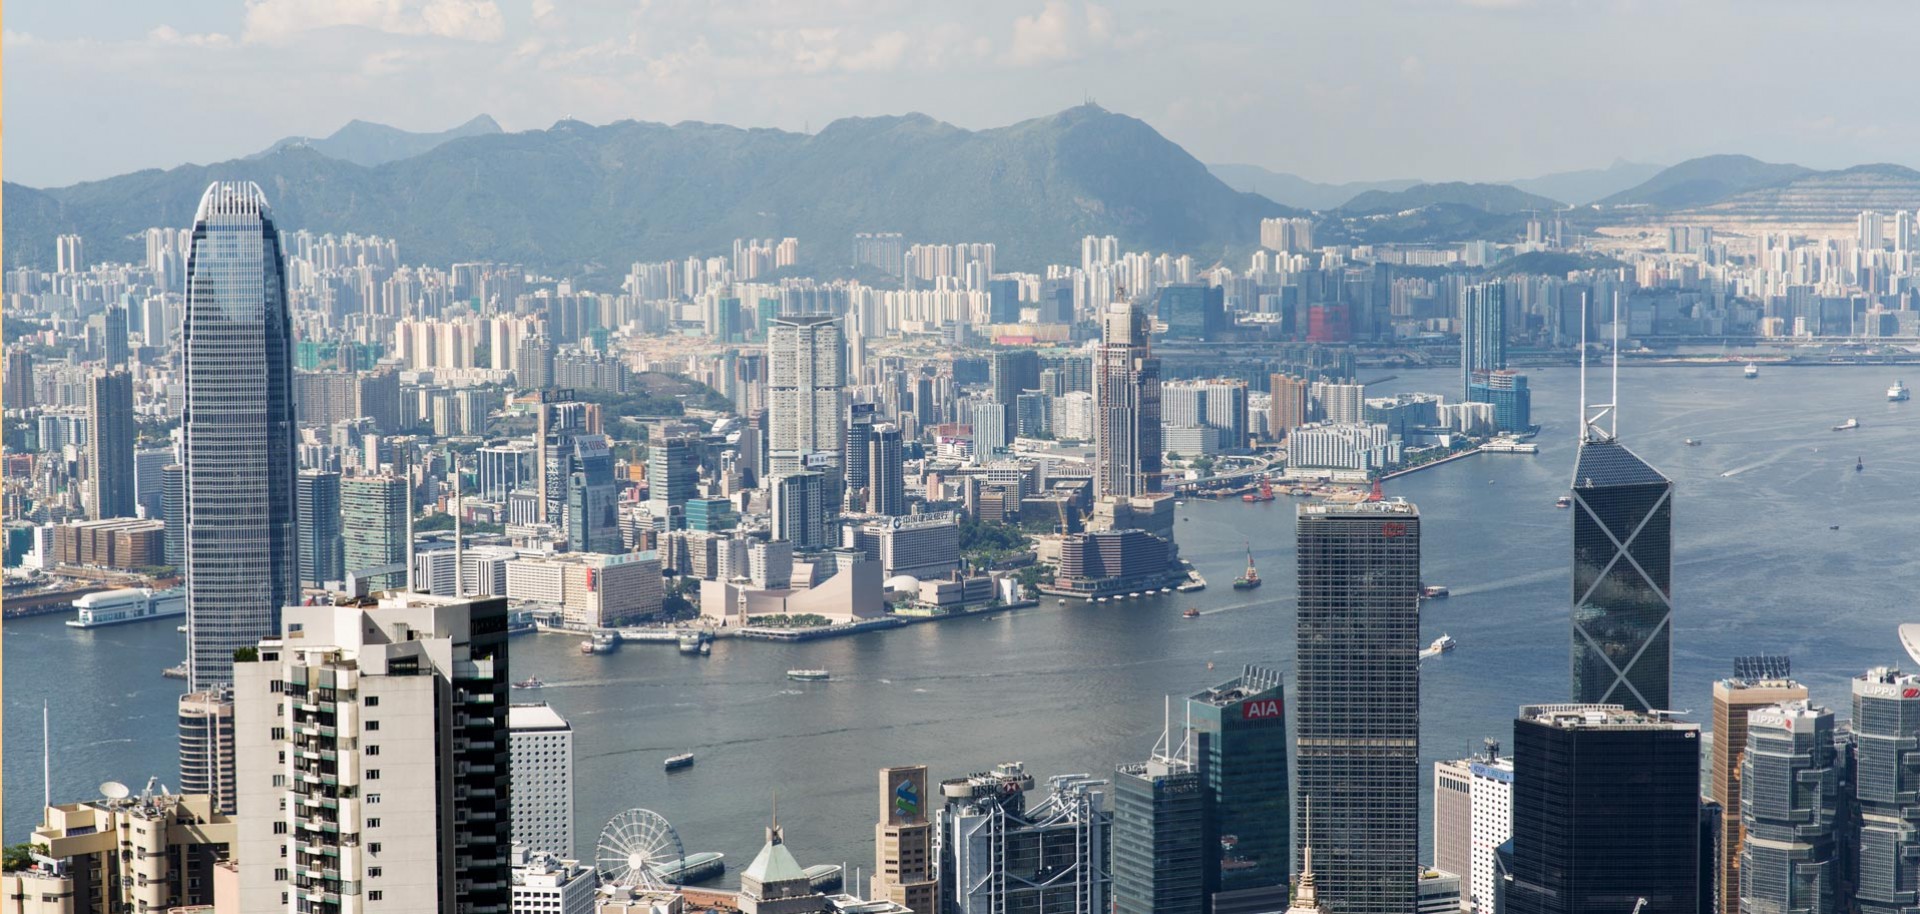 Beijing will likely get its preferring outcome in the Hong Kong chief executive vote.